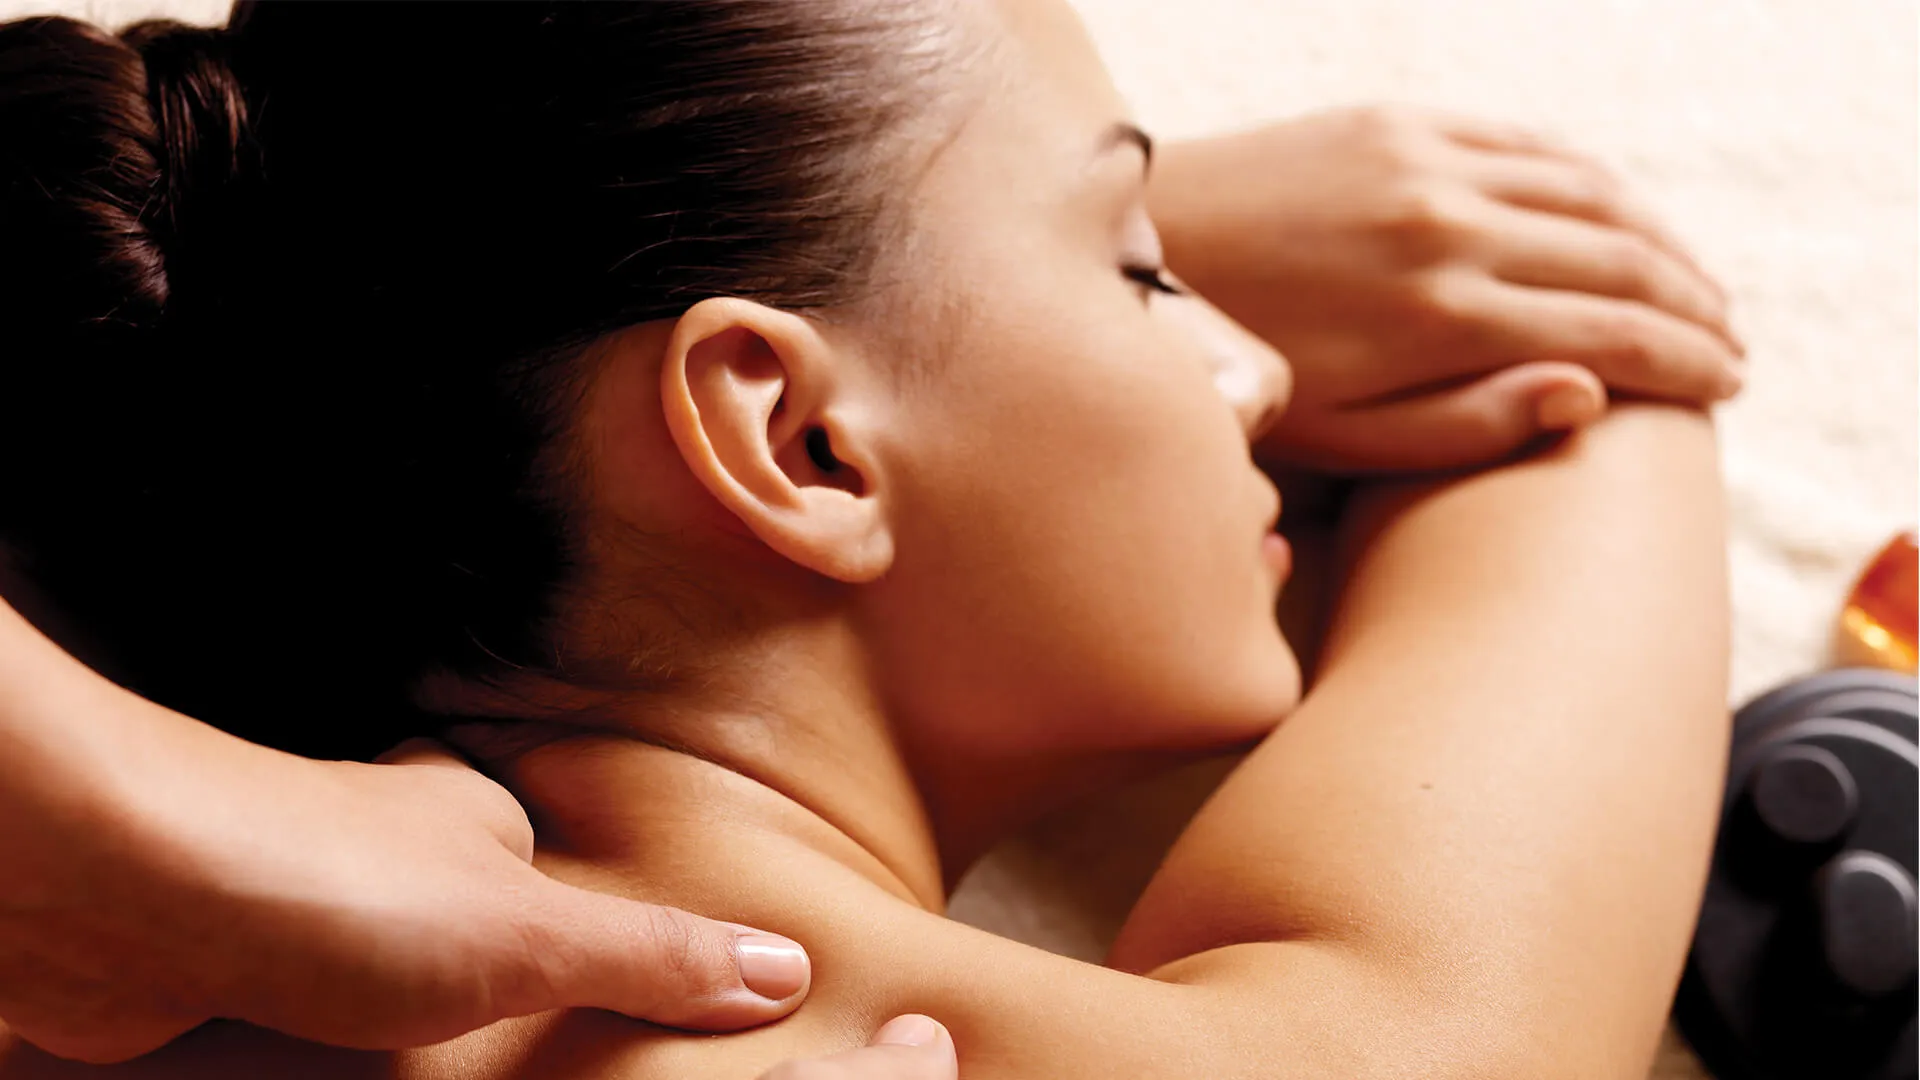 ZaZa Massage in Thailand, Central Asia | Massage Parlors,Sex-Friendly Places - Rated 1